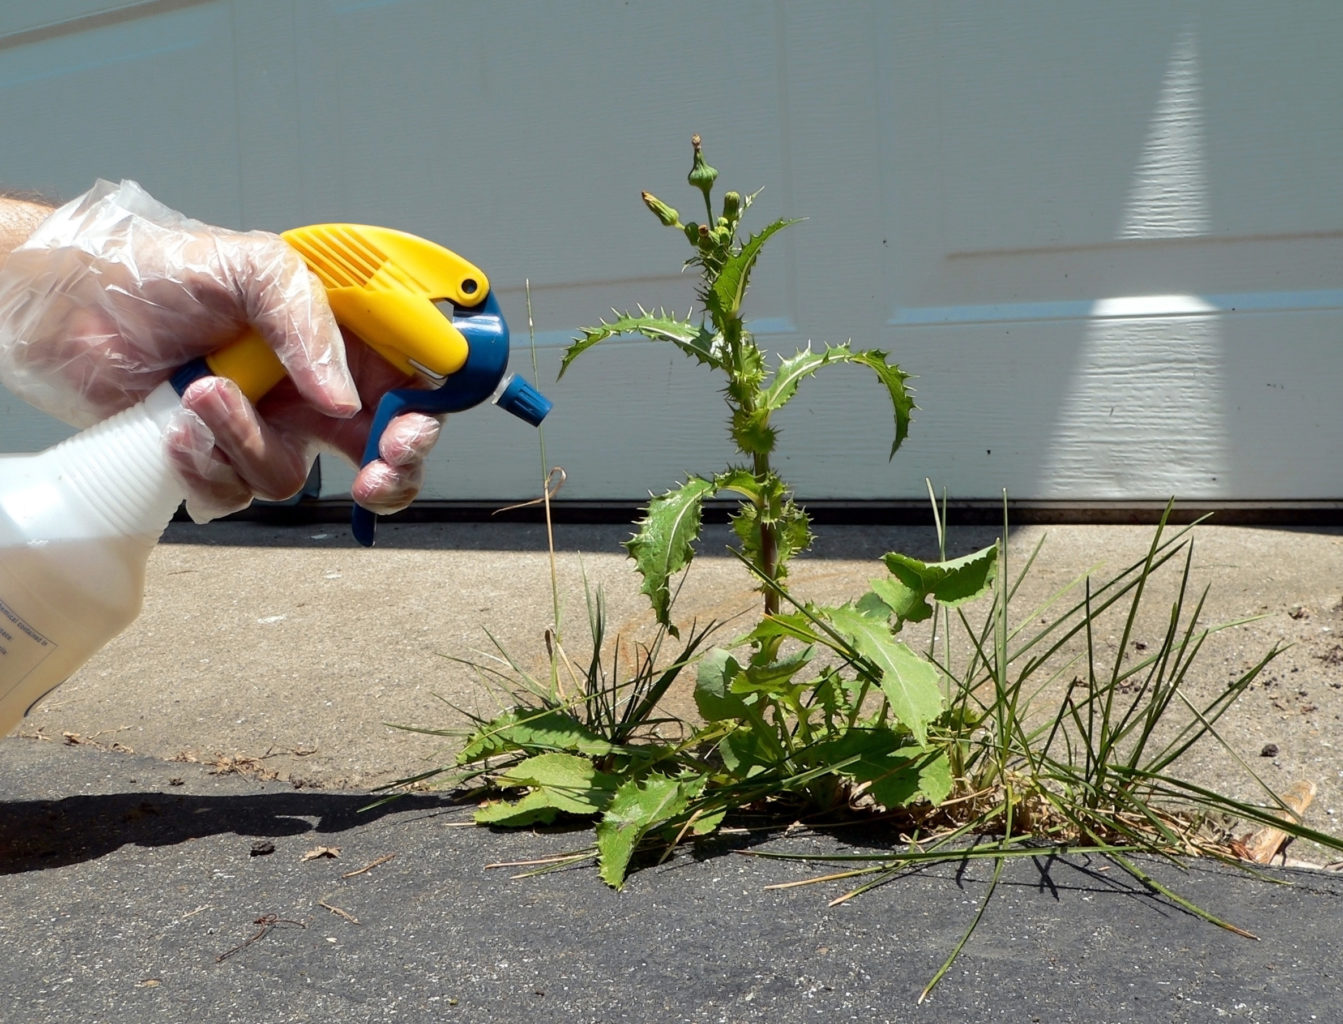 A gloved hand points a spray bottle at a thorny weed growing out of a driveway